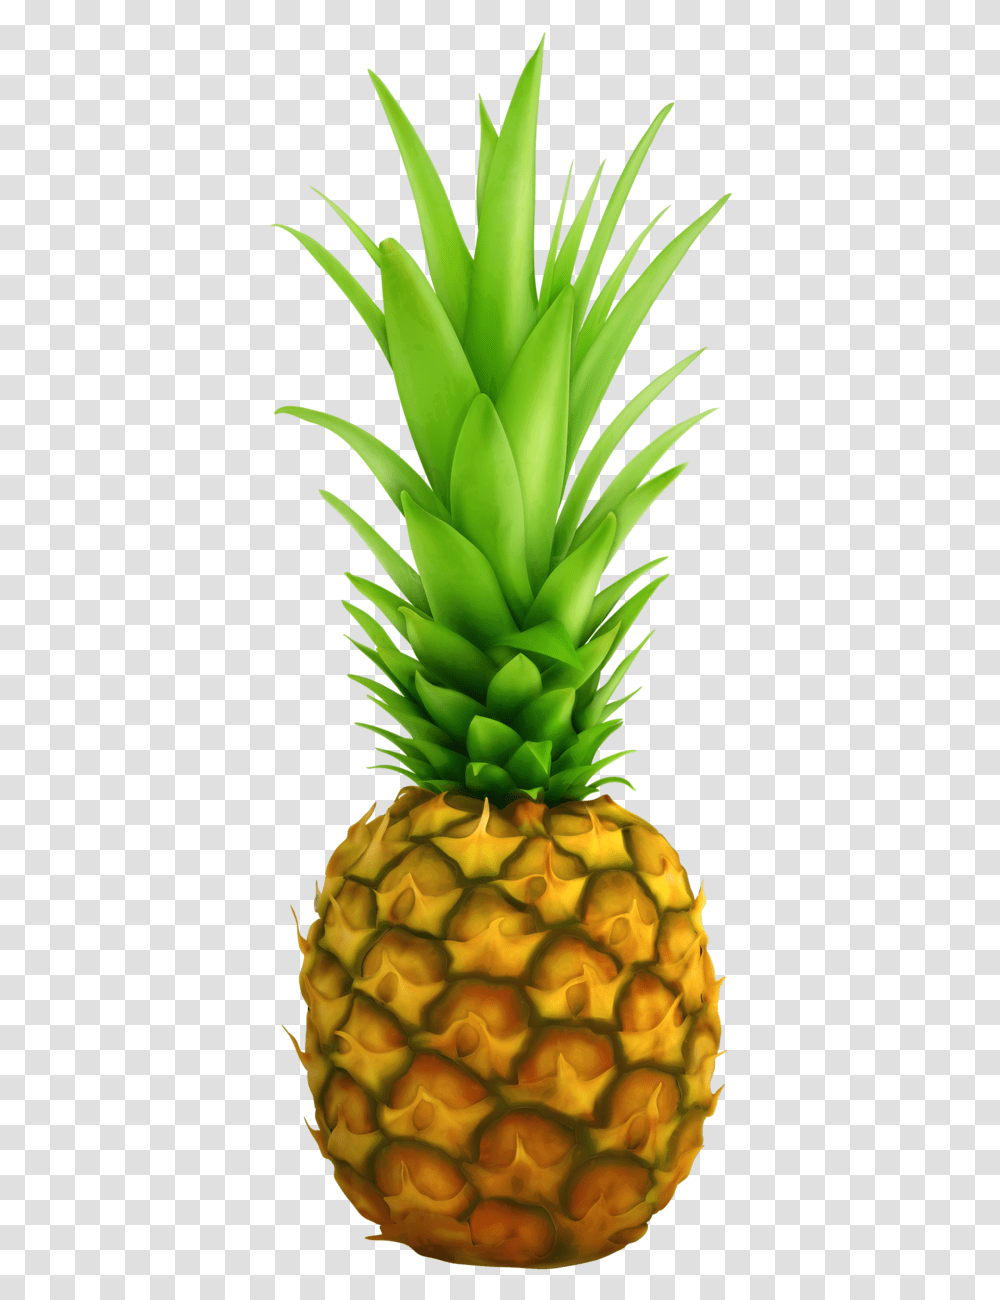 Lemon Clipart Pineapple Free Pineapple Clear Background, Fruit, Plant, Food Transparent Png